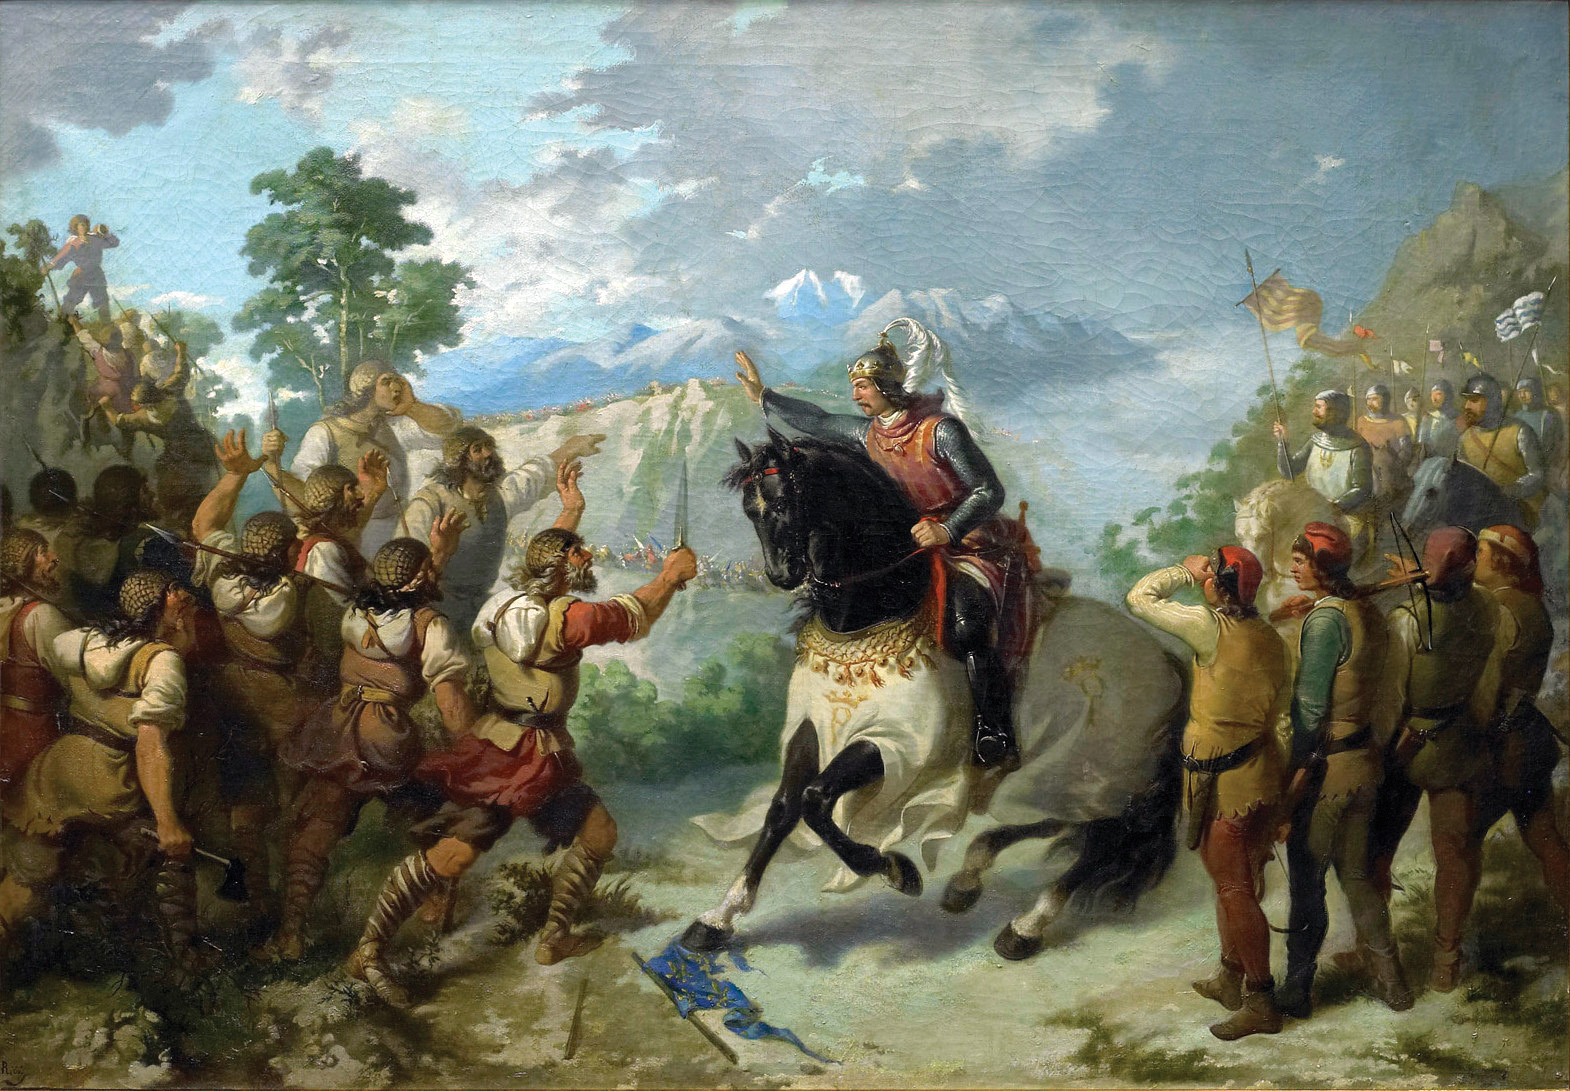 The Almogavars of the Iberian Peninsula were among the Mediterranean region’s best fighters. The bloodthirsty mercenaries were eager for fresh conquests at the conclusion of the War of the Sicilian Vespers.